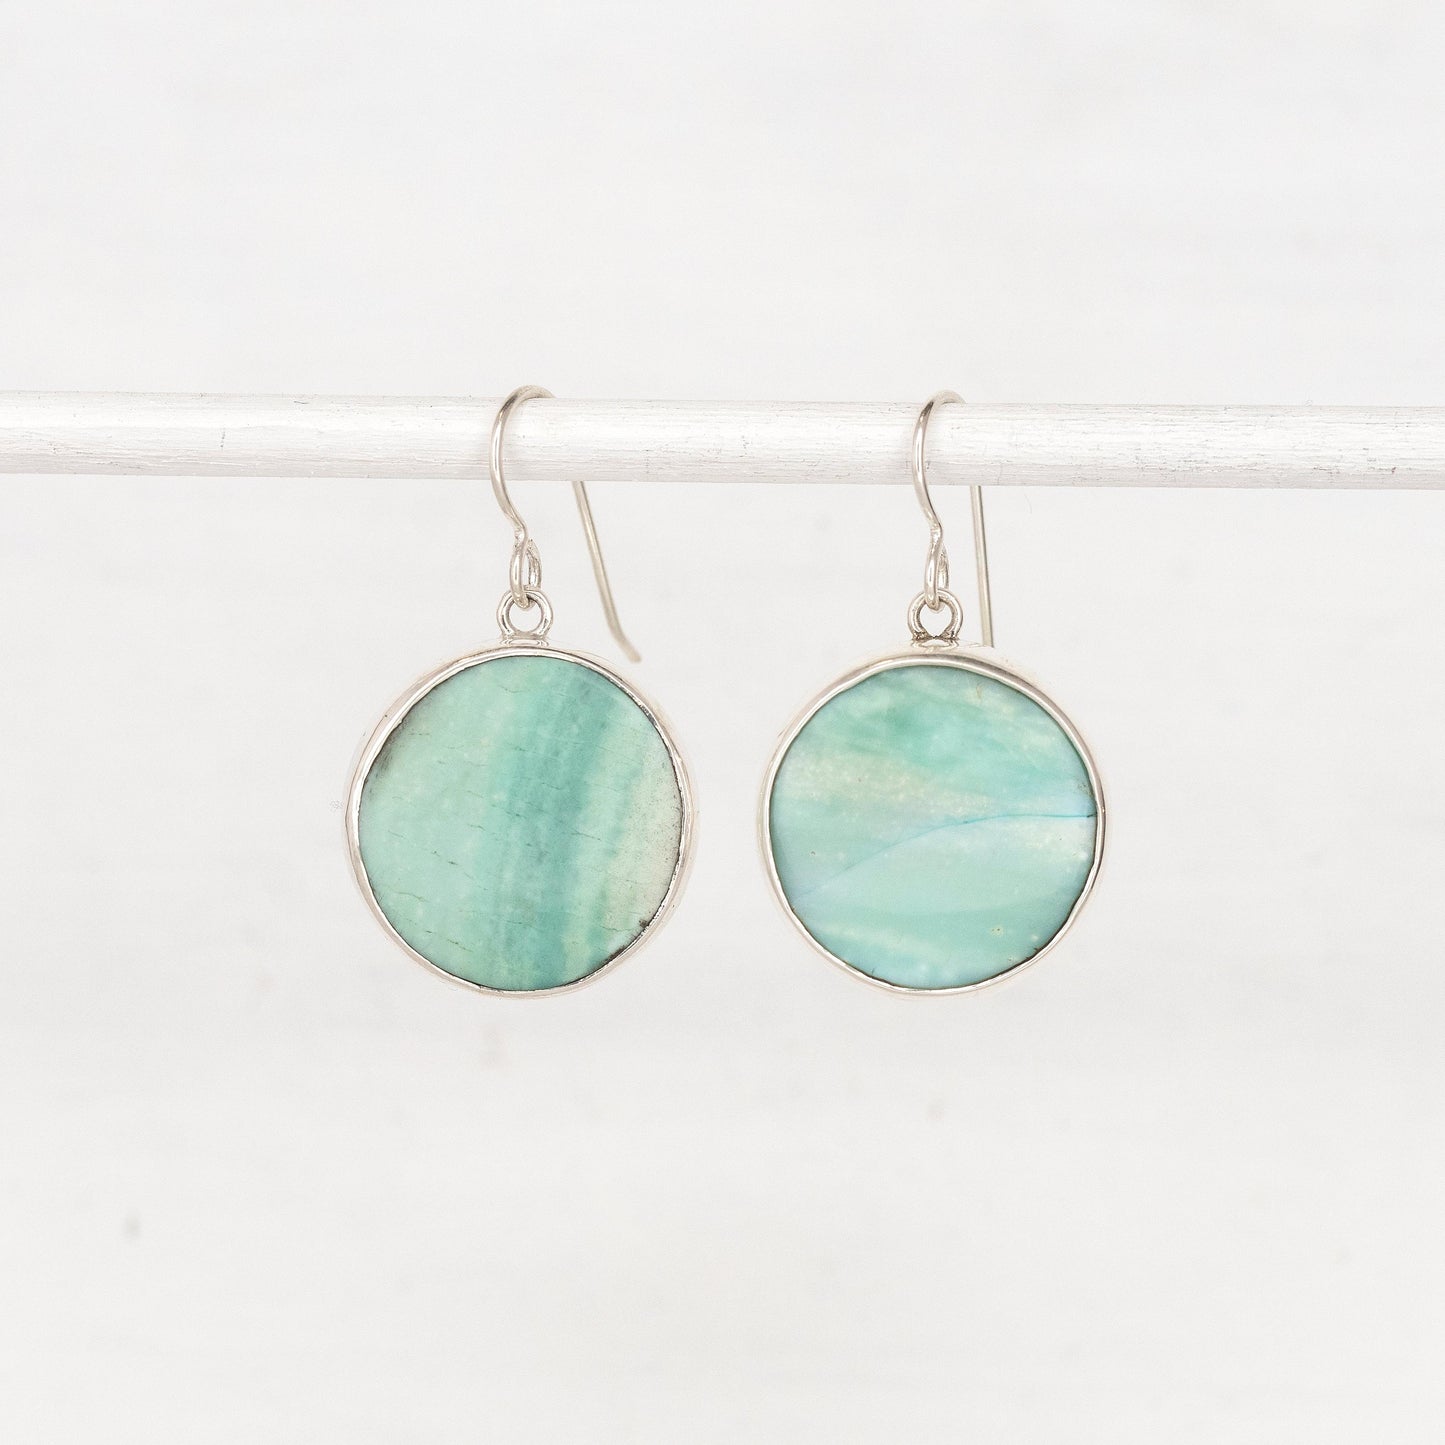 Round Opalized Wood Dangle Earrings with Waves